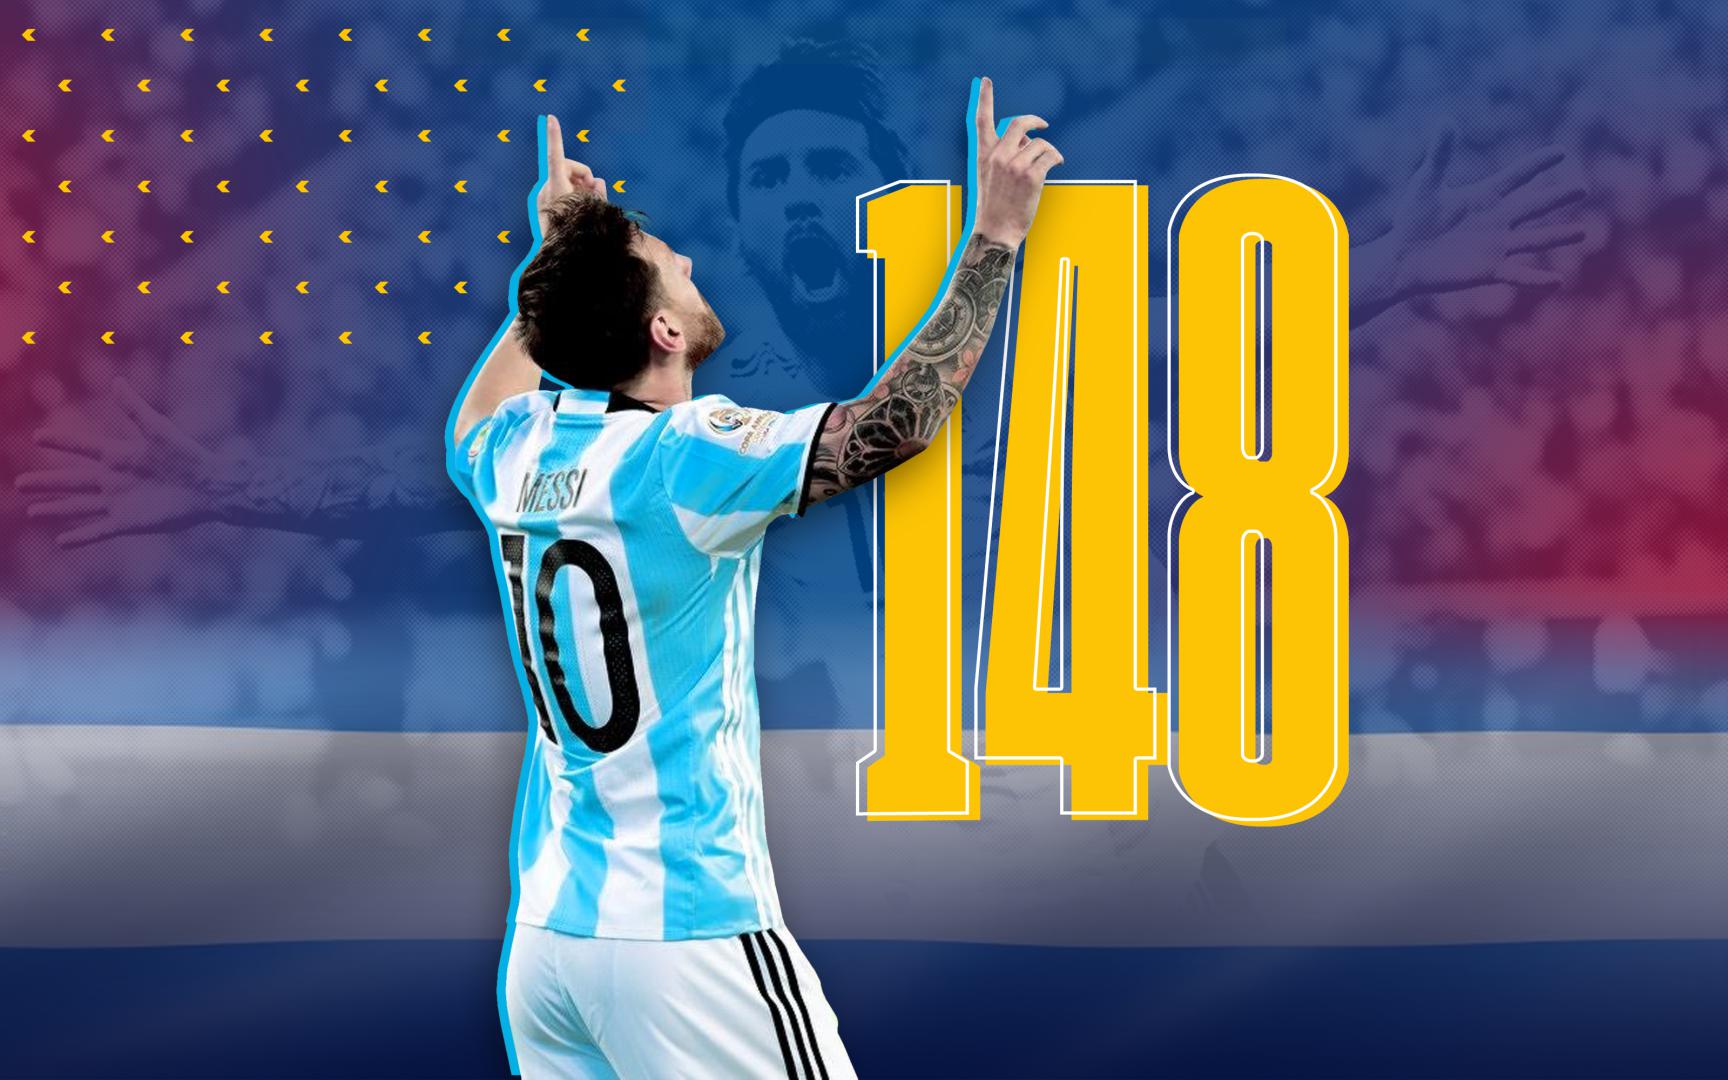 Background Messi Wallpaper Discover more Argentine, Captain